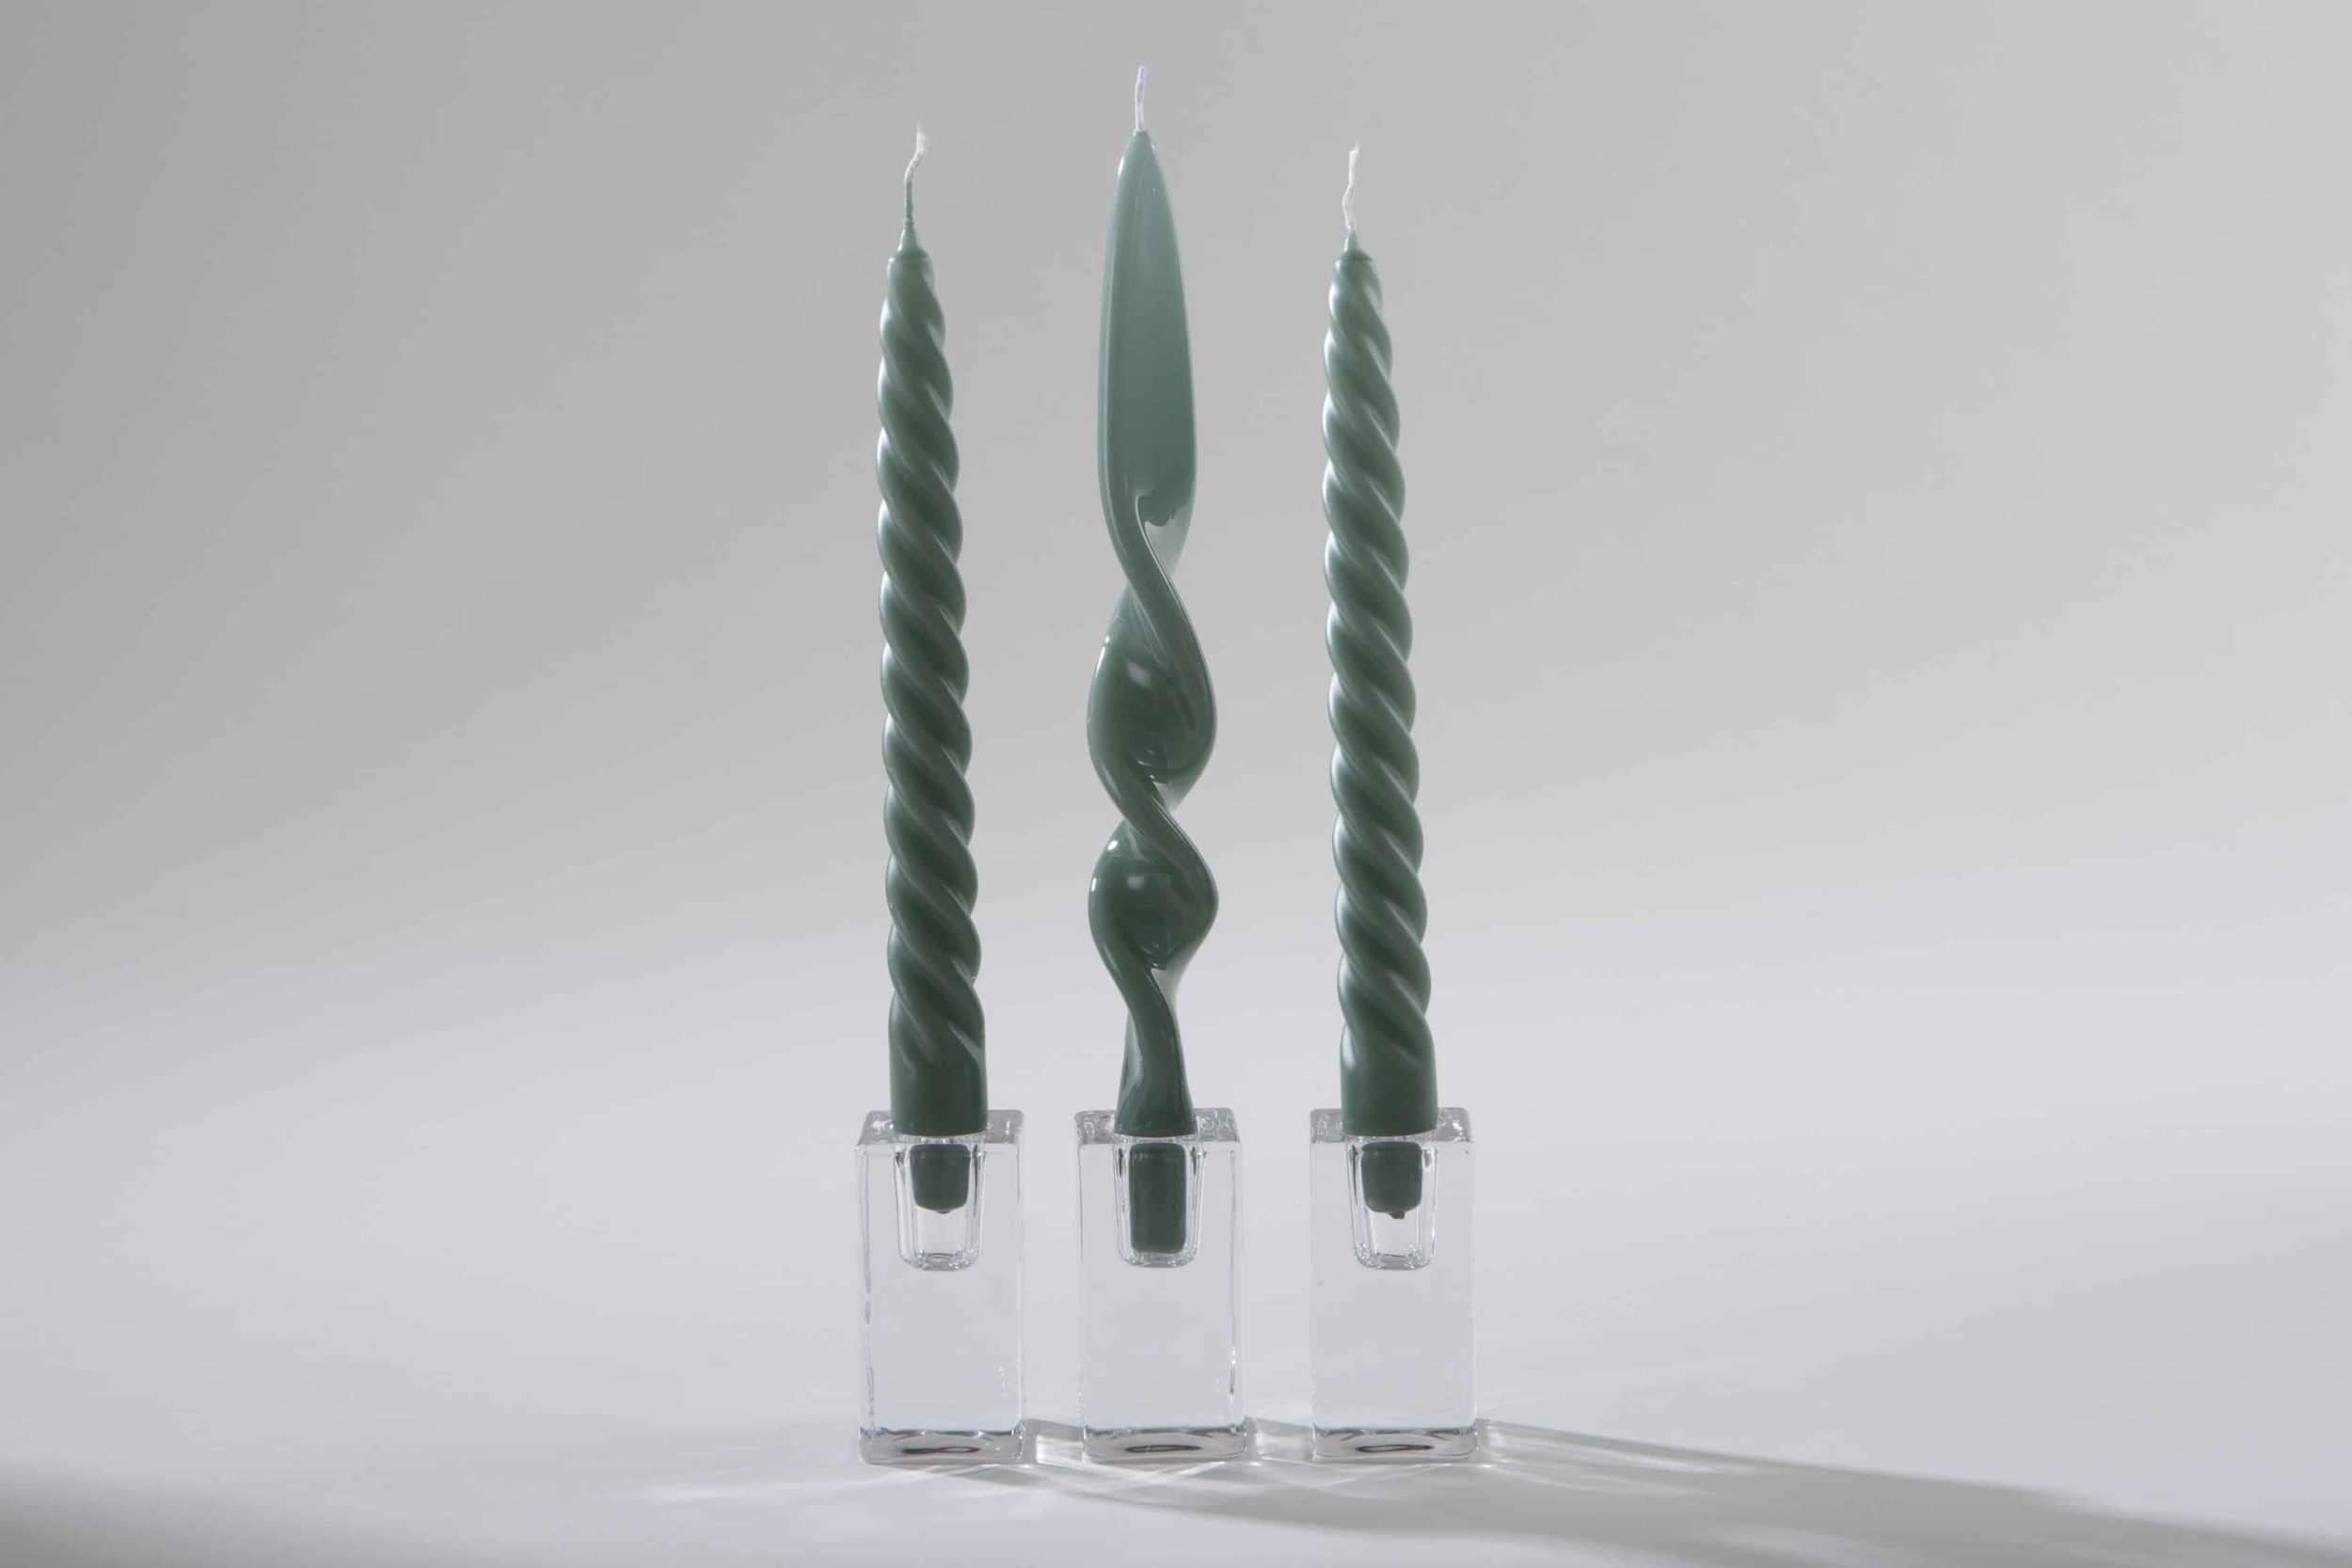  | Whether in Teal or Glitz Pink, these twisted candles with their sophisticated minimalist design are a showstopper. Somehow, they are more than just a candle, almost a small object of art that not only looks great on the table but also as an eye-catcher on sideboards or bar trolleys.Our spiral candles are carefully made by hand in a traditional manufactory in Italy.  The softly shaped candles look particularly good in our “Rivadavia” candle holders made of clear glass.We exclusively offer ca... | 